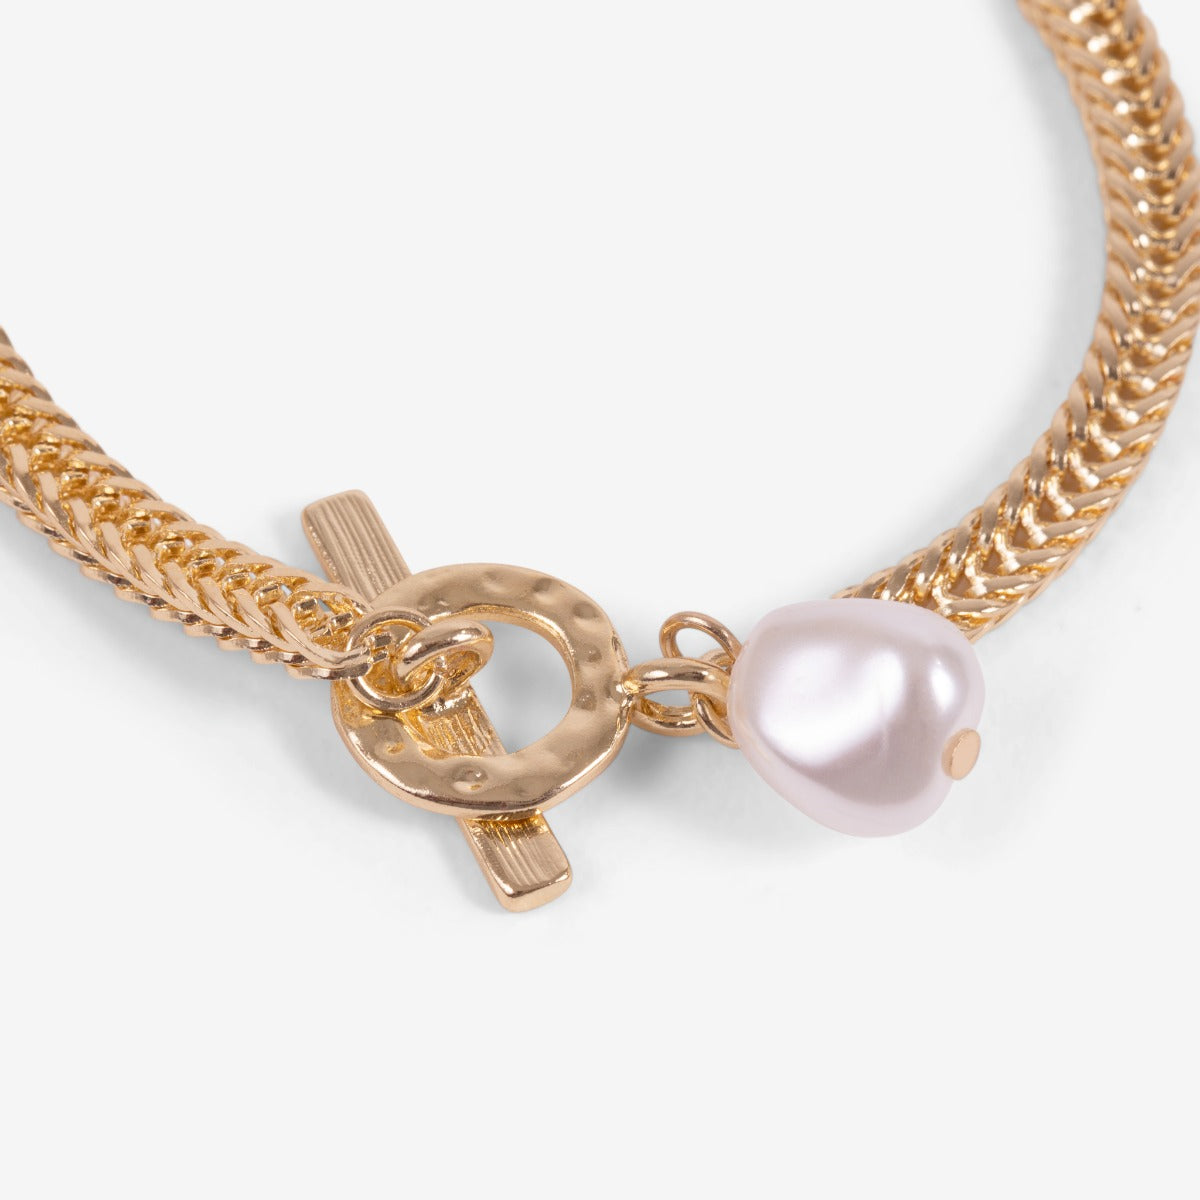 Golden mesh bracelet with hammered circle clasp and pearl charm